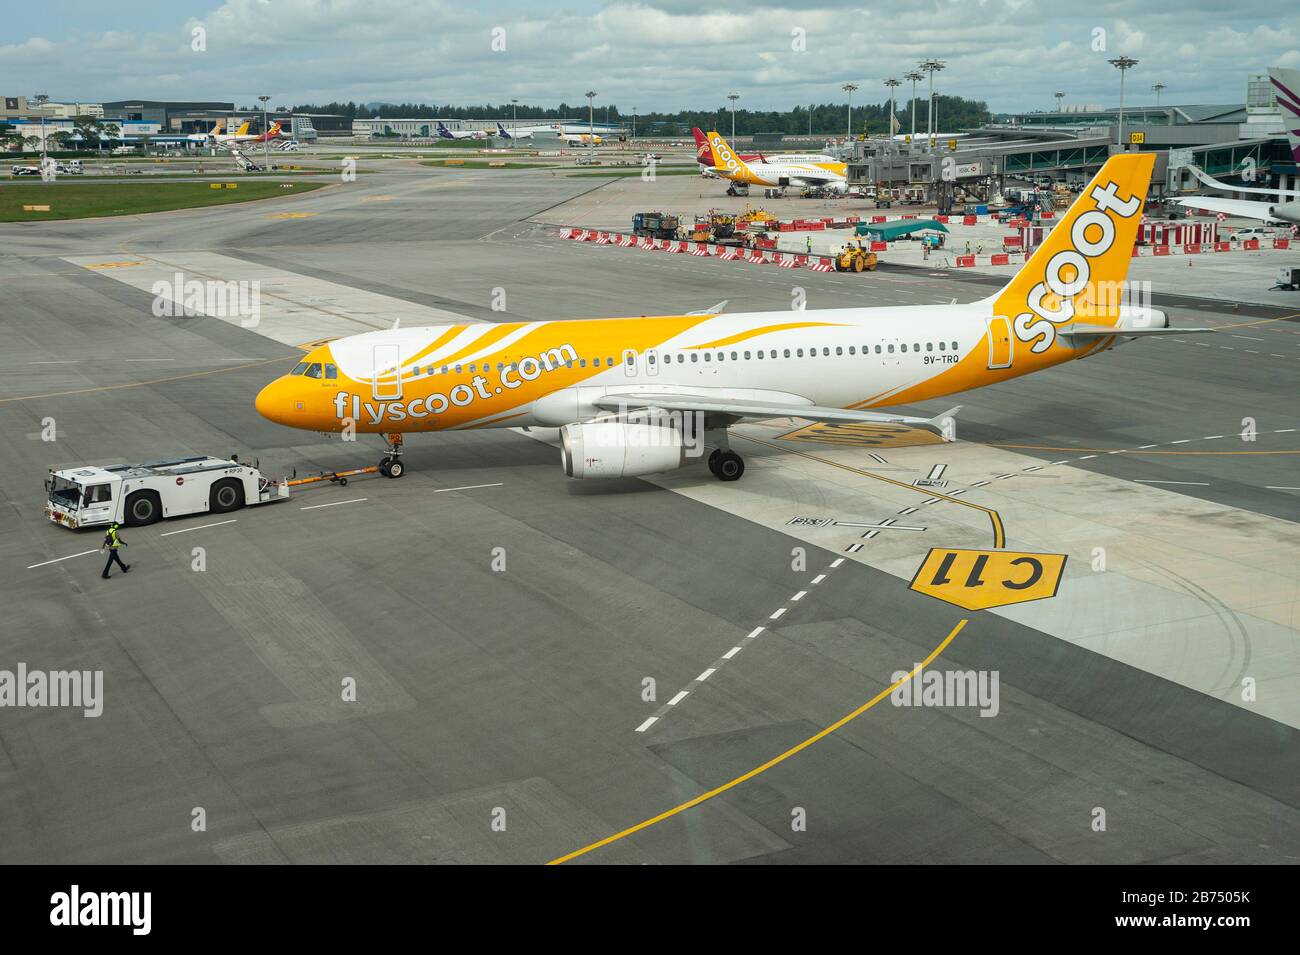 19.12.2019, Singapore, Republic of Singapore, Asia - A Scoot Airlines  Airbus A320 passenger aircraft during pushback at Changi Airport.  [automated translation] Stock Photo - Alamy